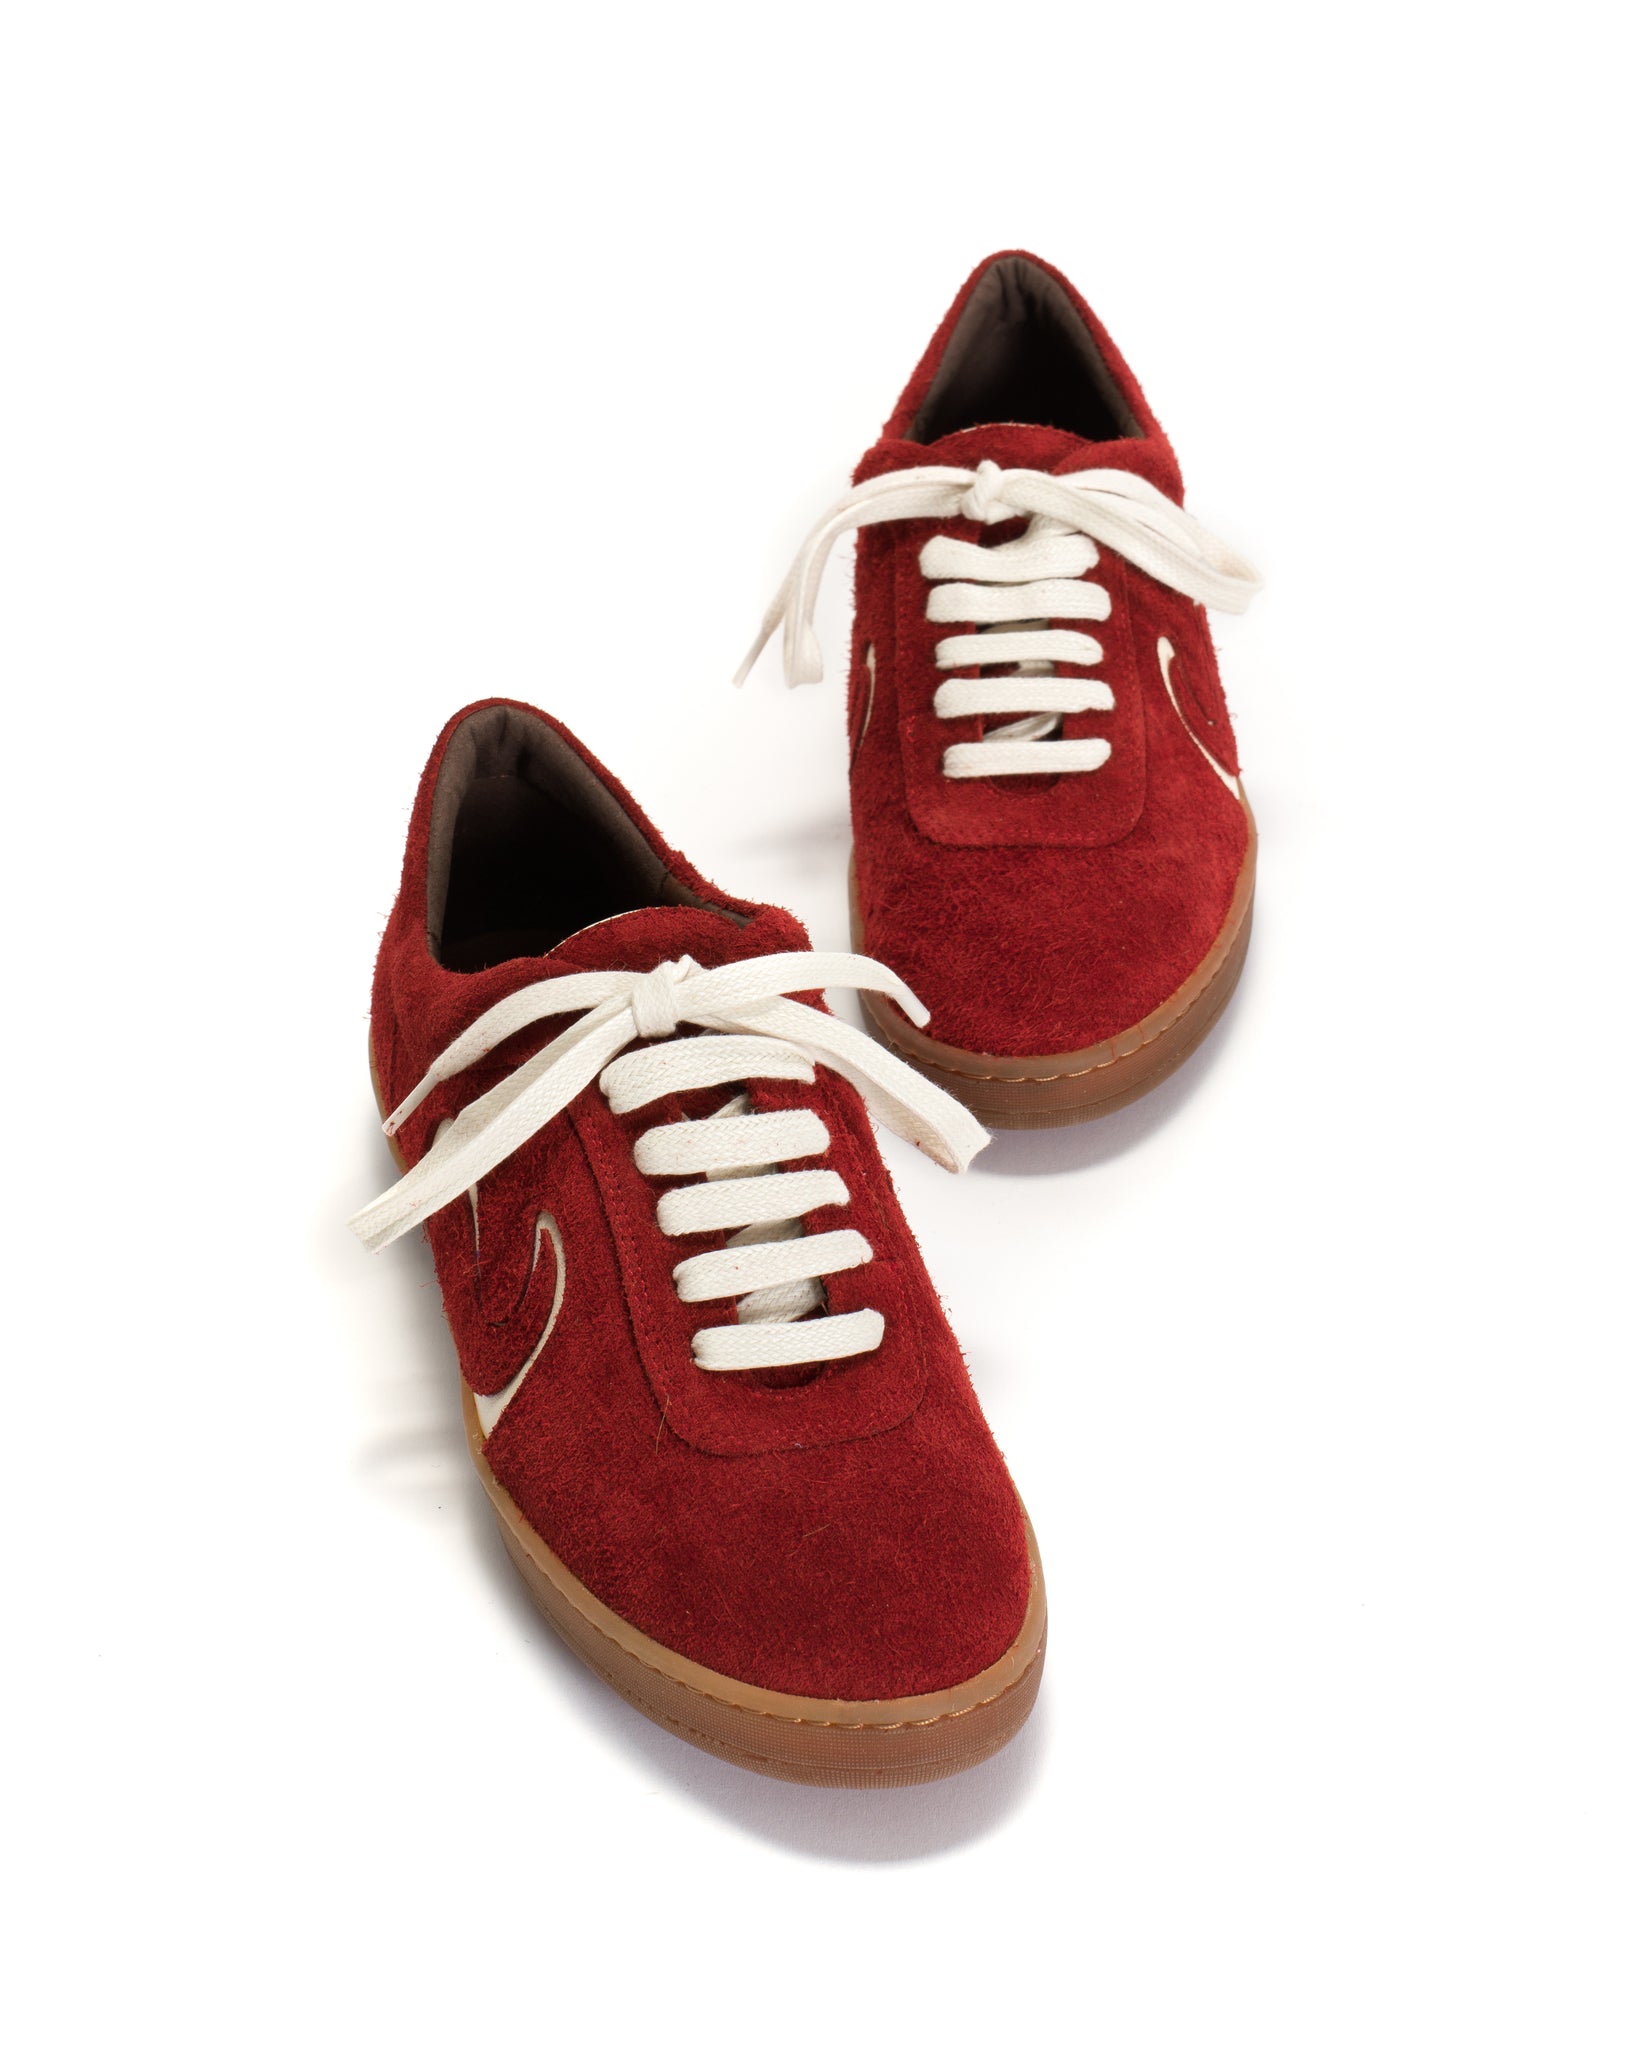 Blaire Plushed calf suede Ruby red